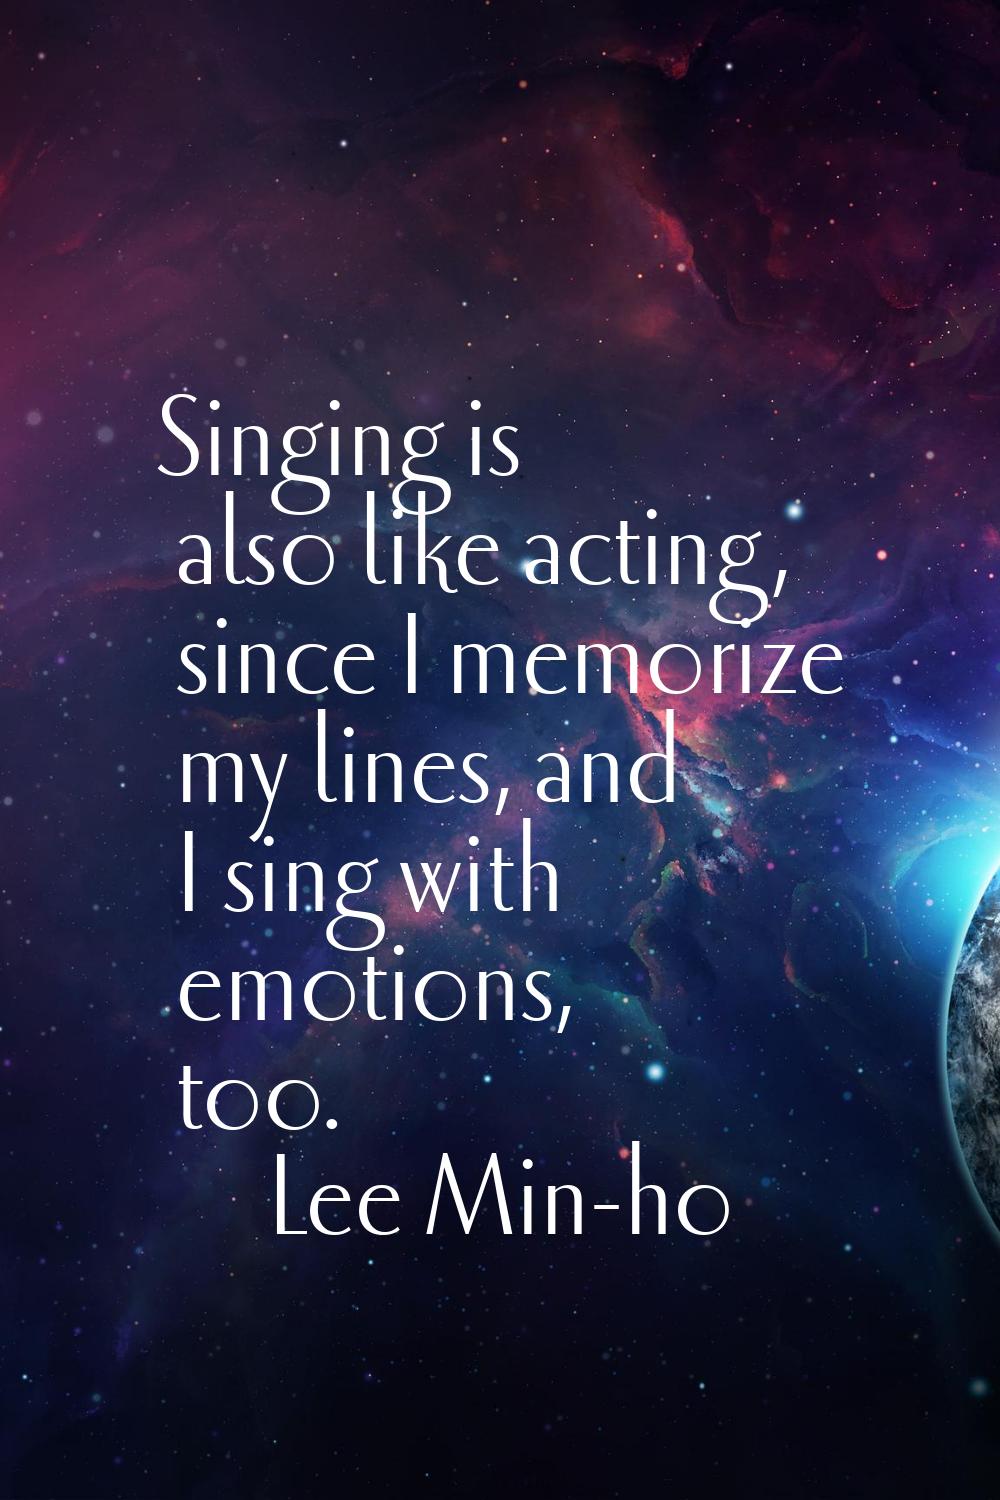 Singing is also like acting, since I memorize my lines, and I sing with emotions, too.